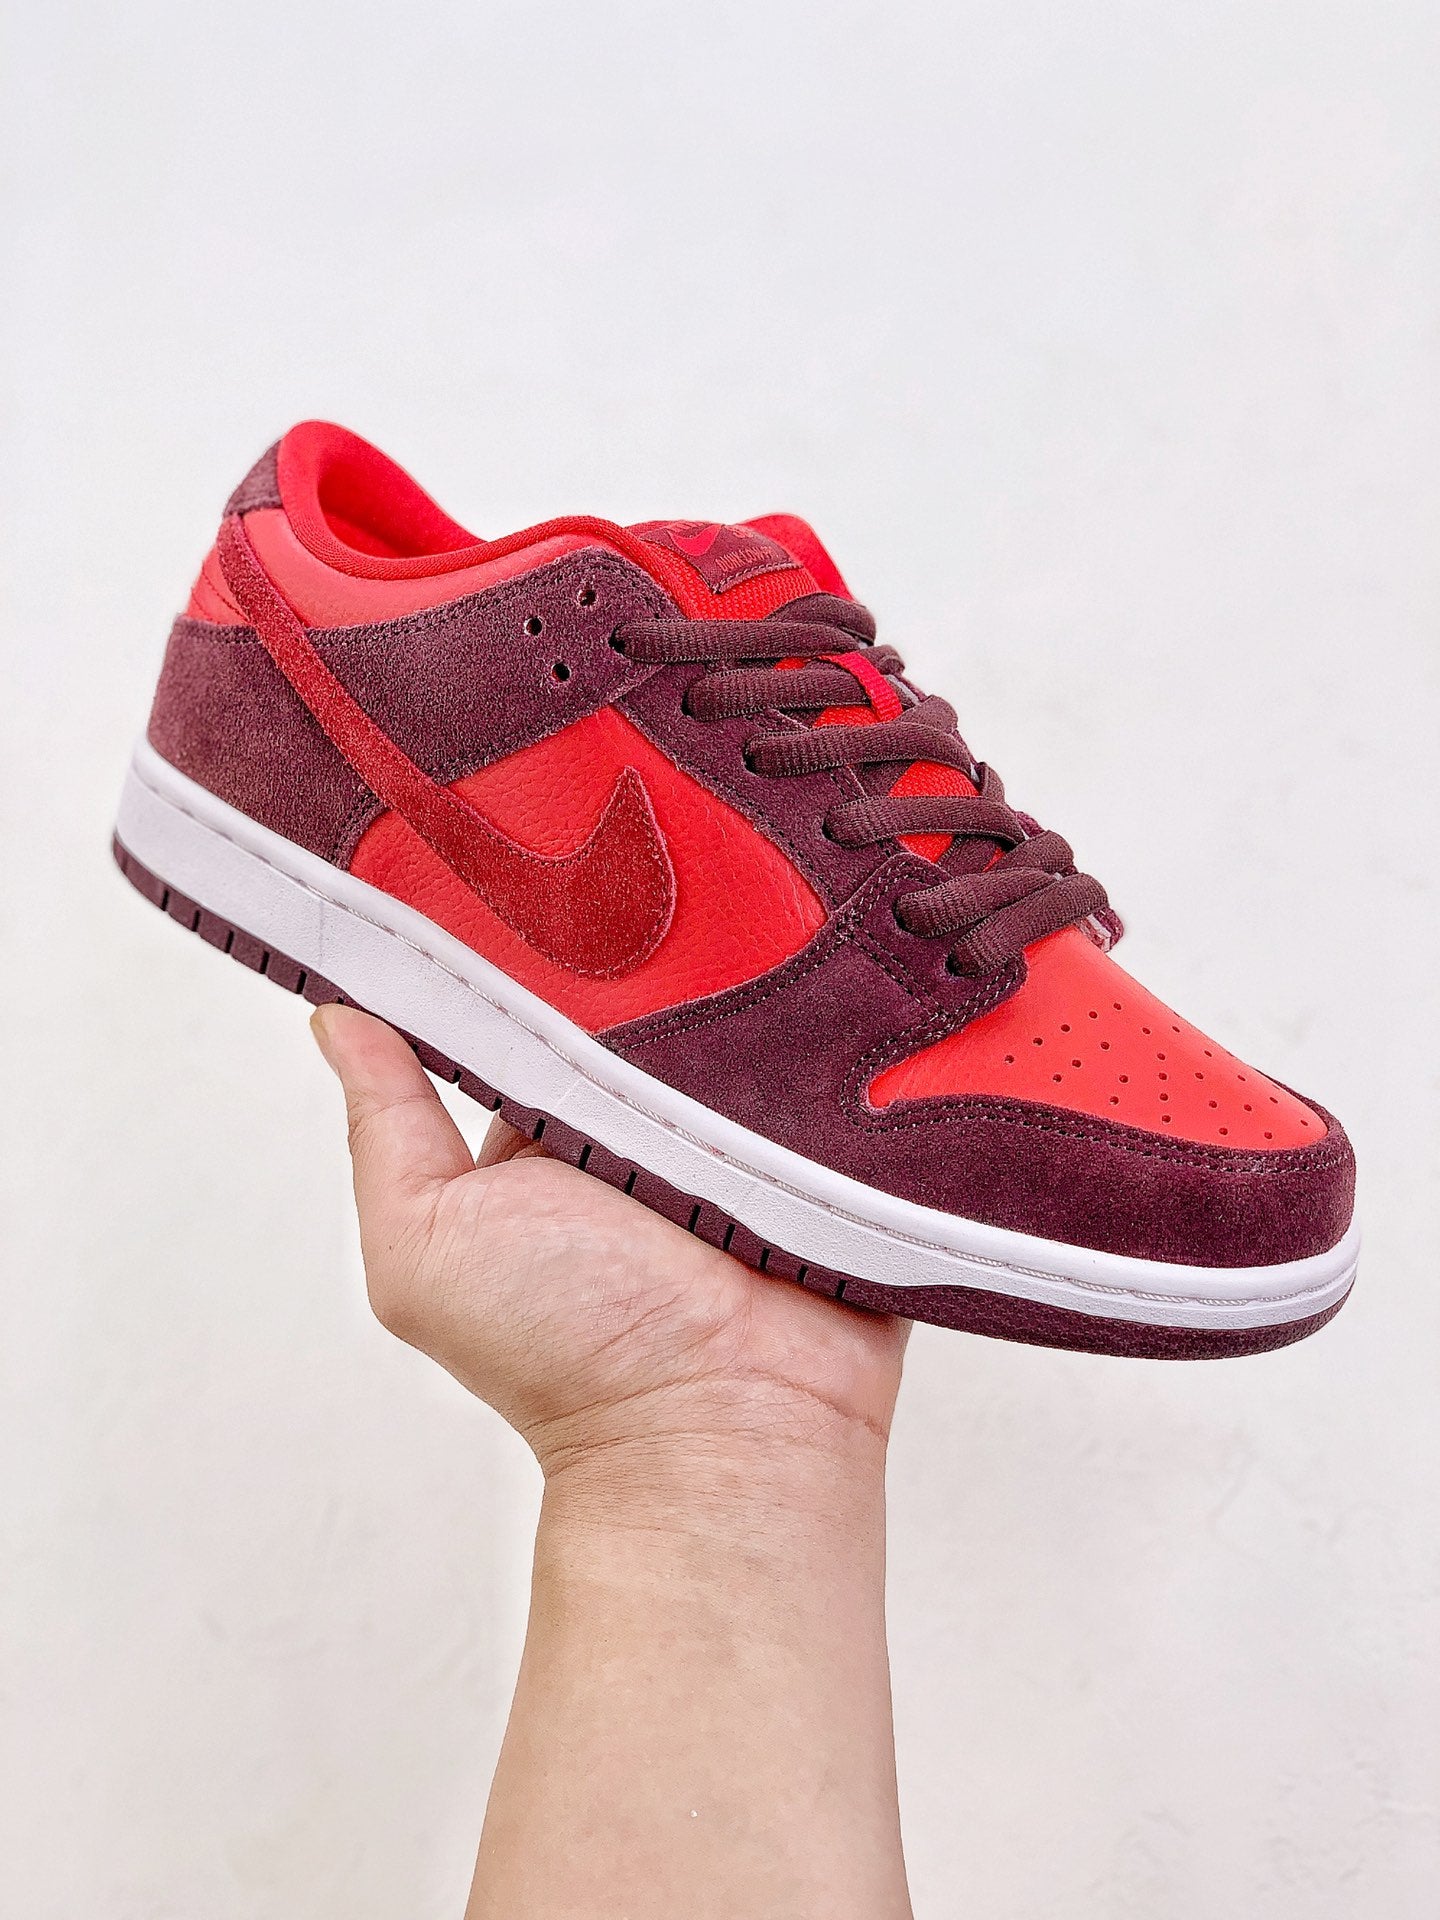 Nike SB Dunk Low  "Double Red "